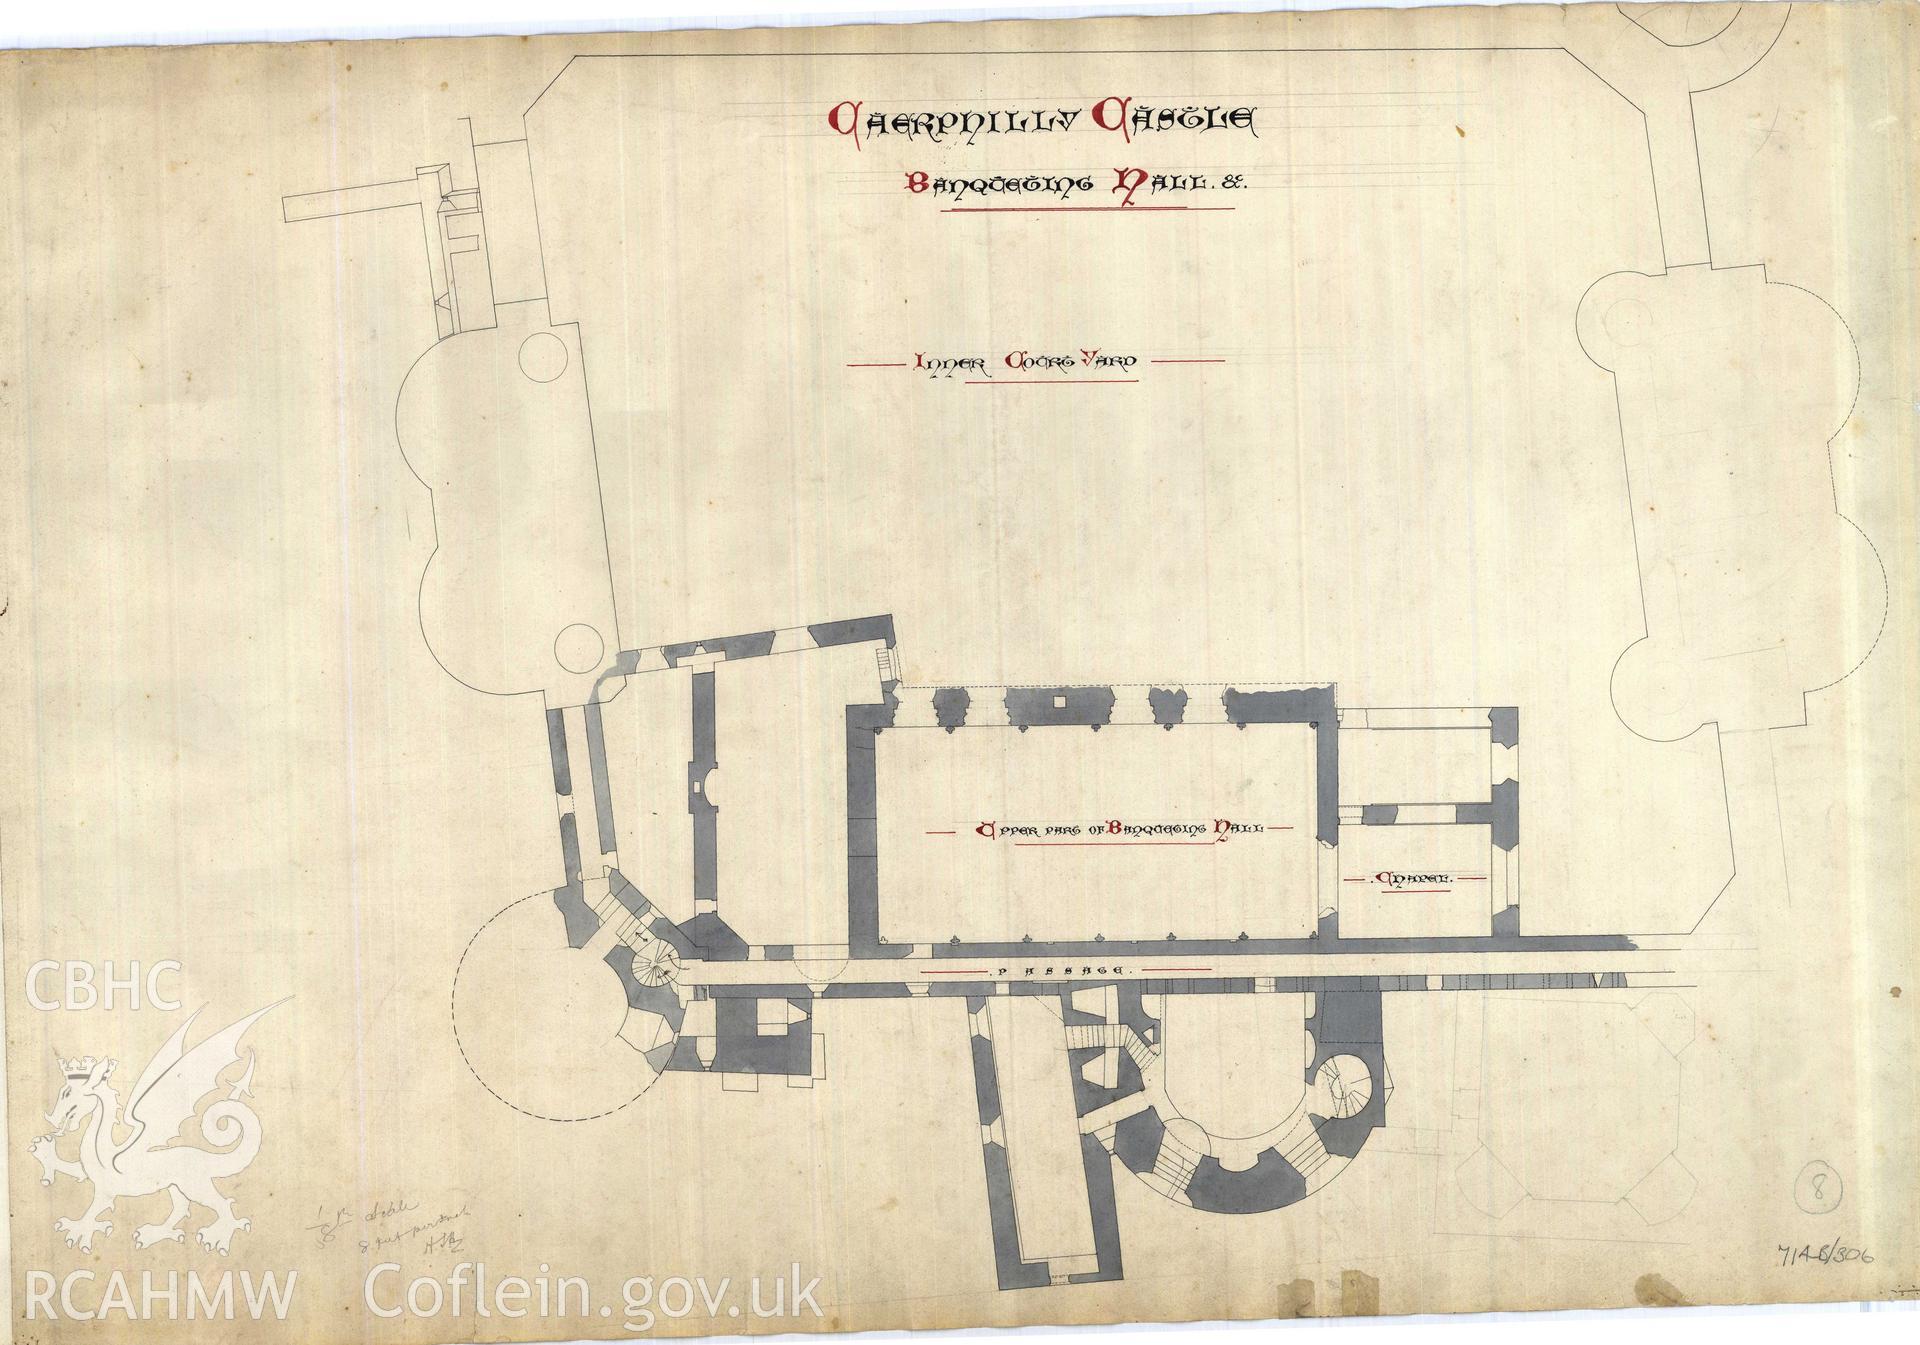 Cadw guardianship monument drawing of Caerphilly Castle. Great Hall etc upper floor plan. Cadw Ref. No:714B/306. Scale 1:96.